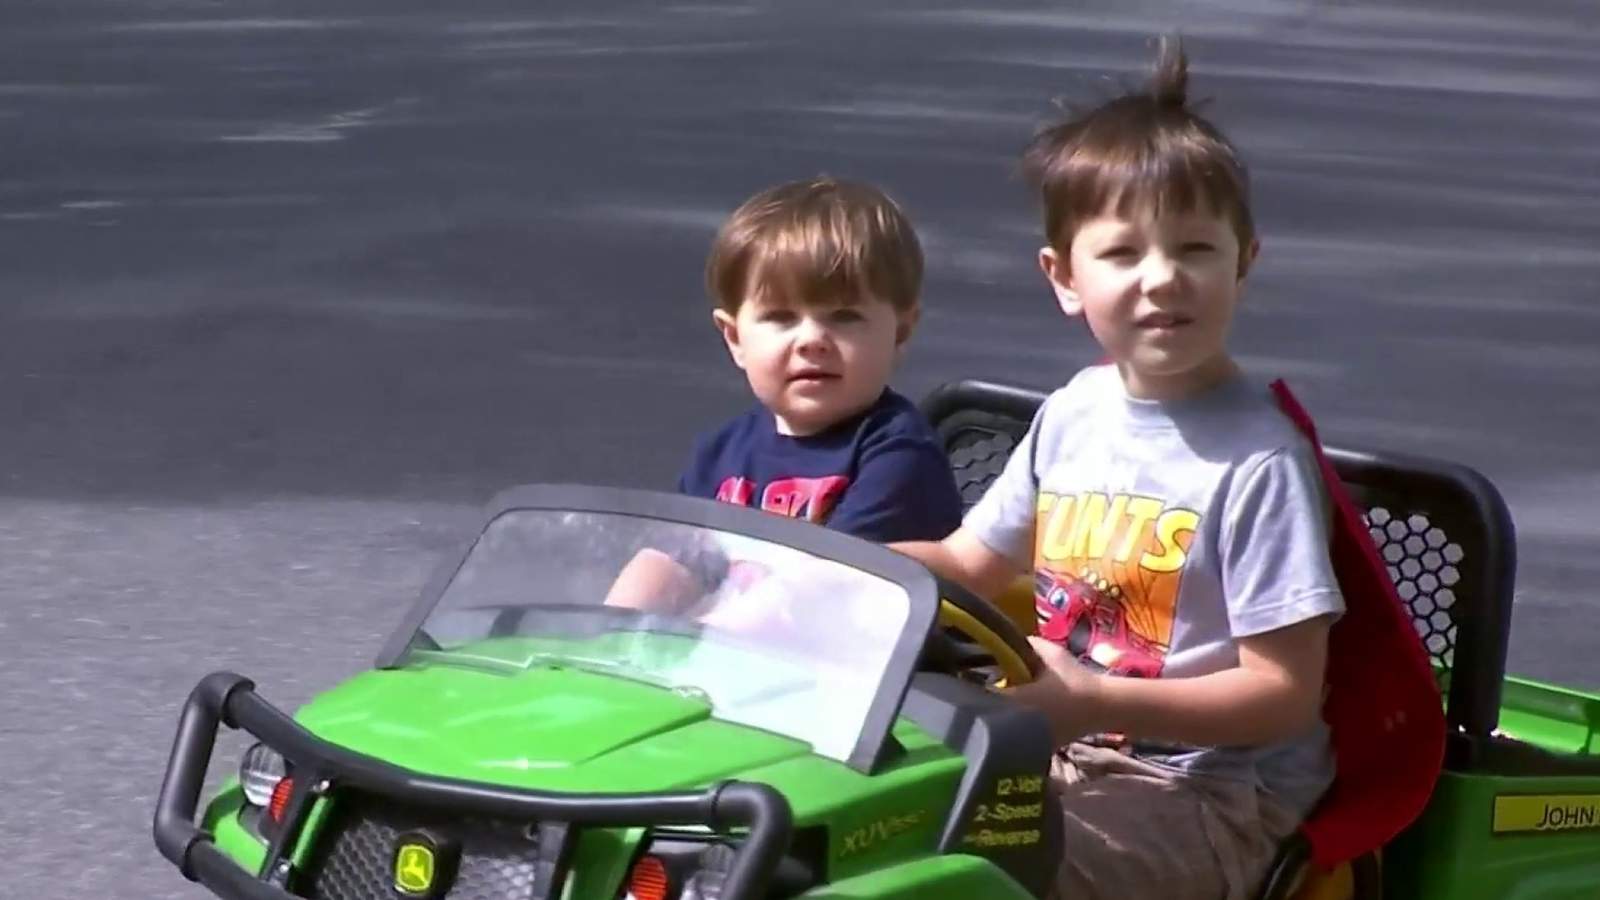 Eustis boy receives unforgettable birthday surprise when truck drivers came together